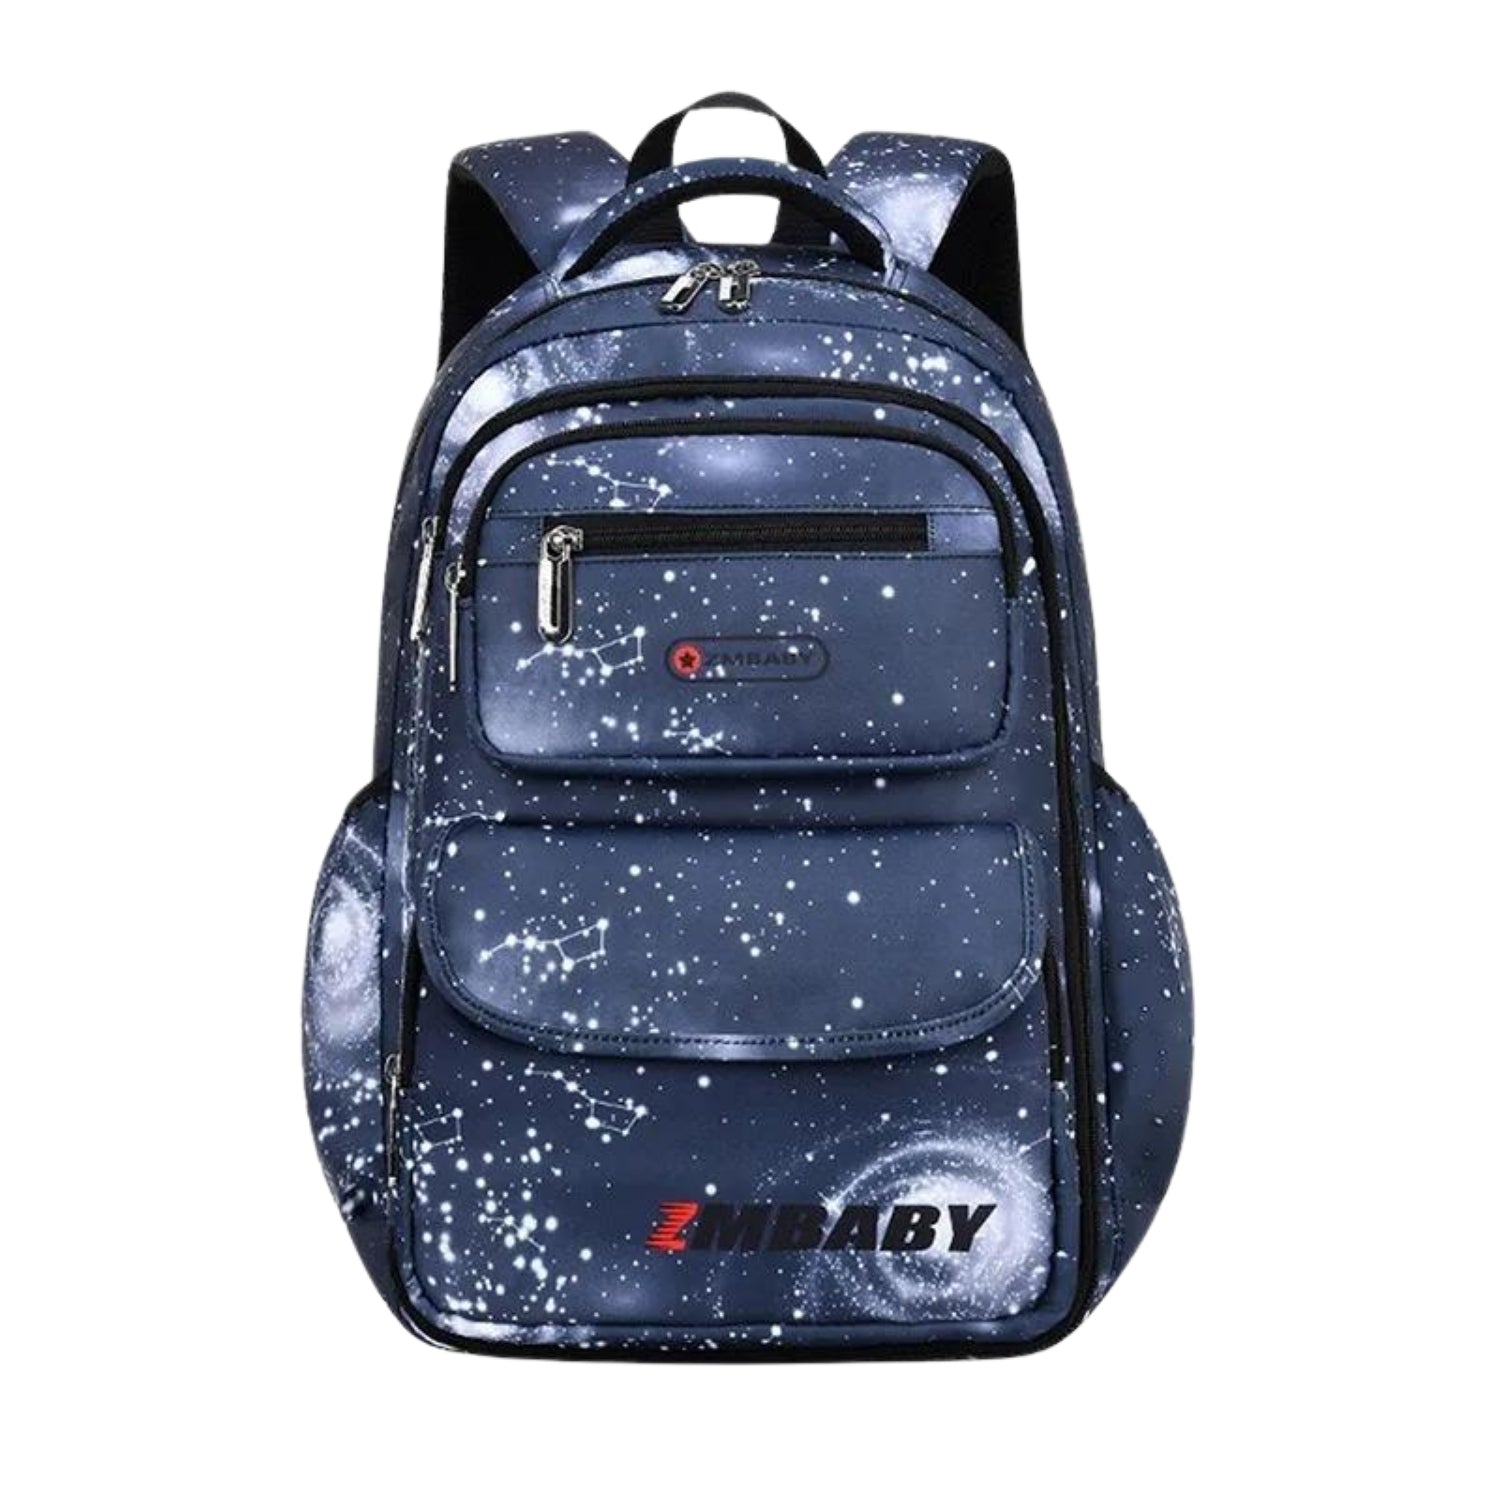 Space-Themed Organizational School Backpack